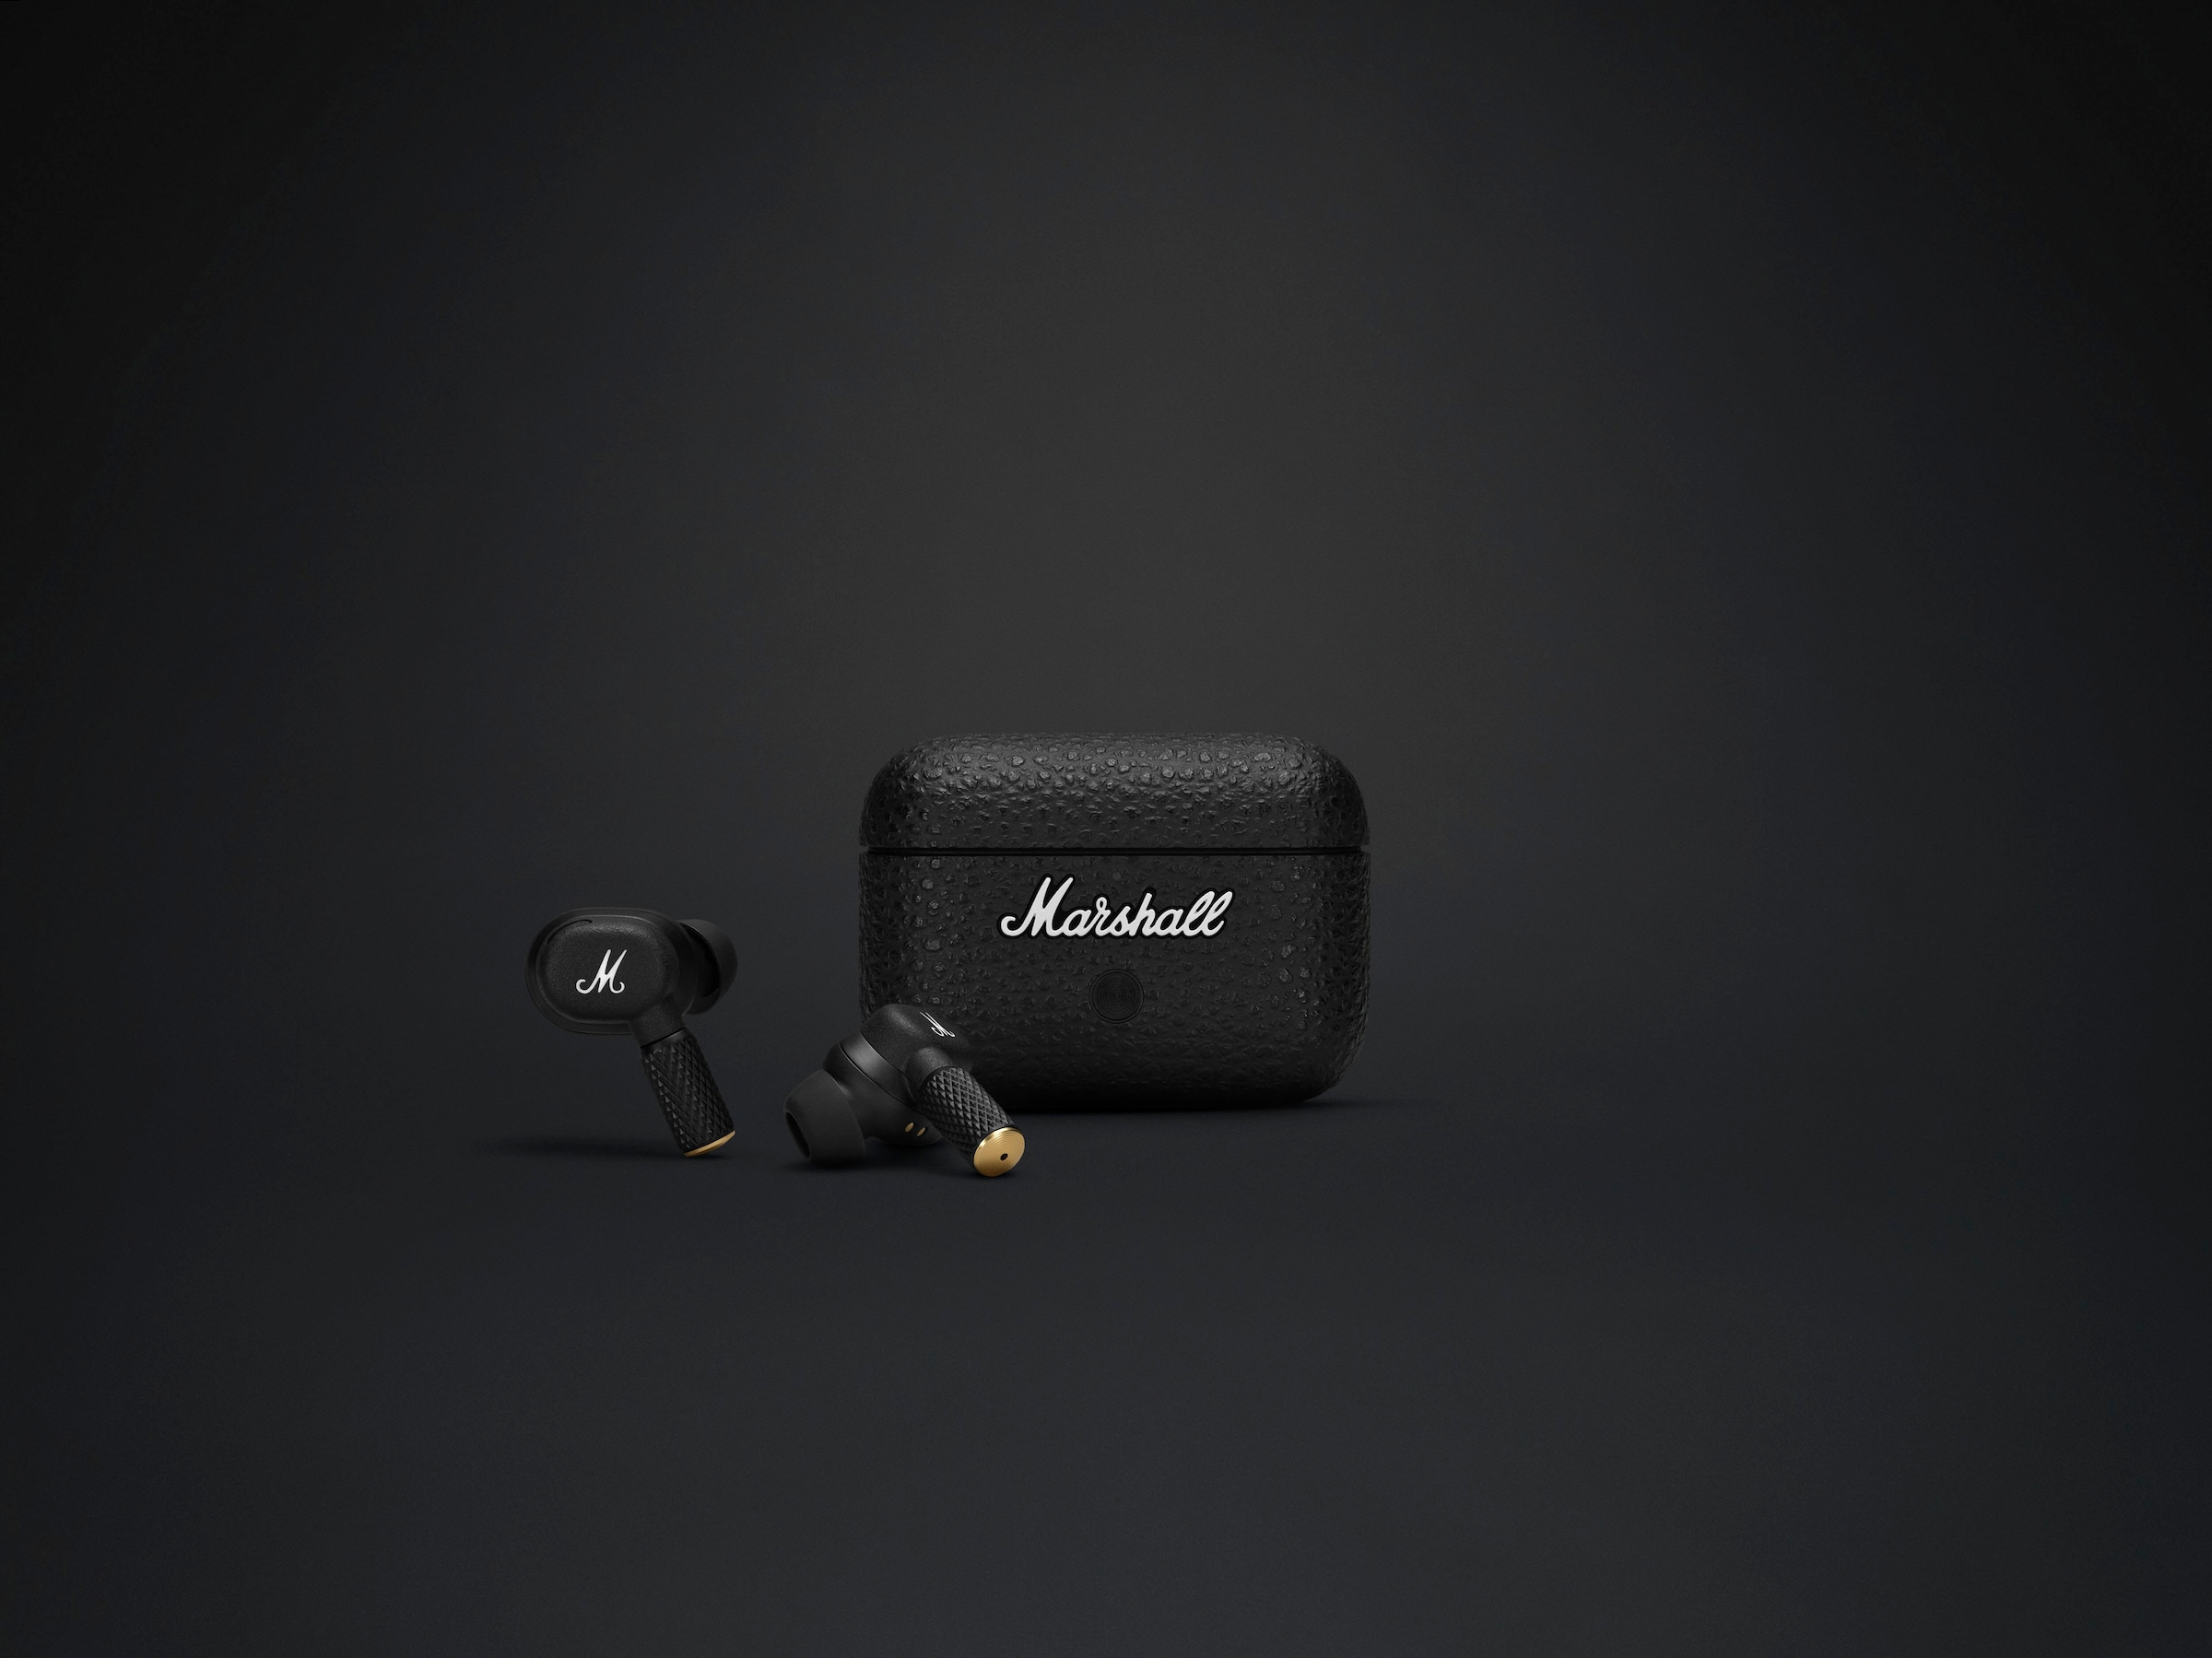 Cancelling (ANC) »Motif bei ANC«, jetzt OTTO Noise Bluetooth, Marshall Active II In-Ear-Kopfhörer